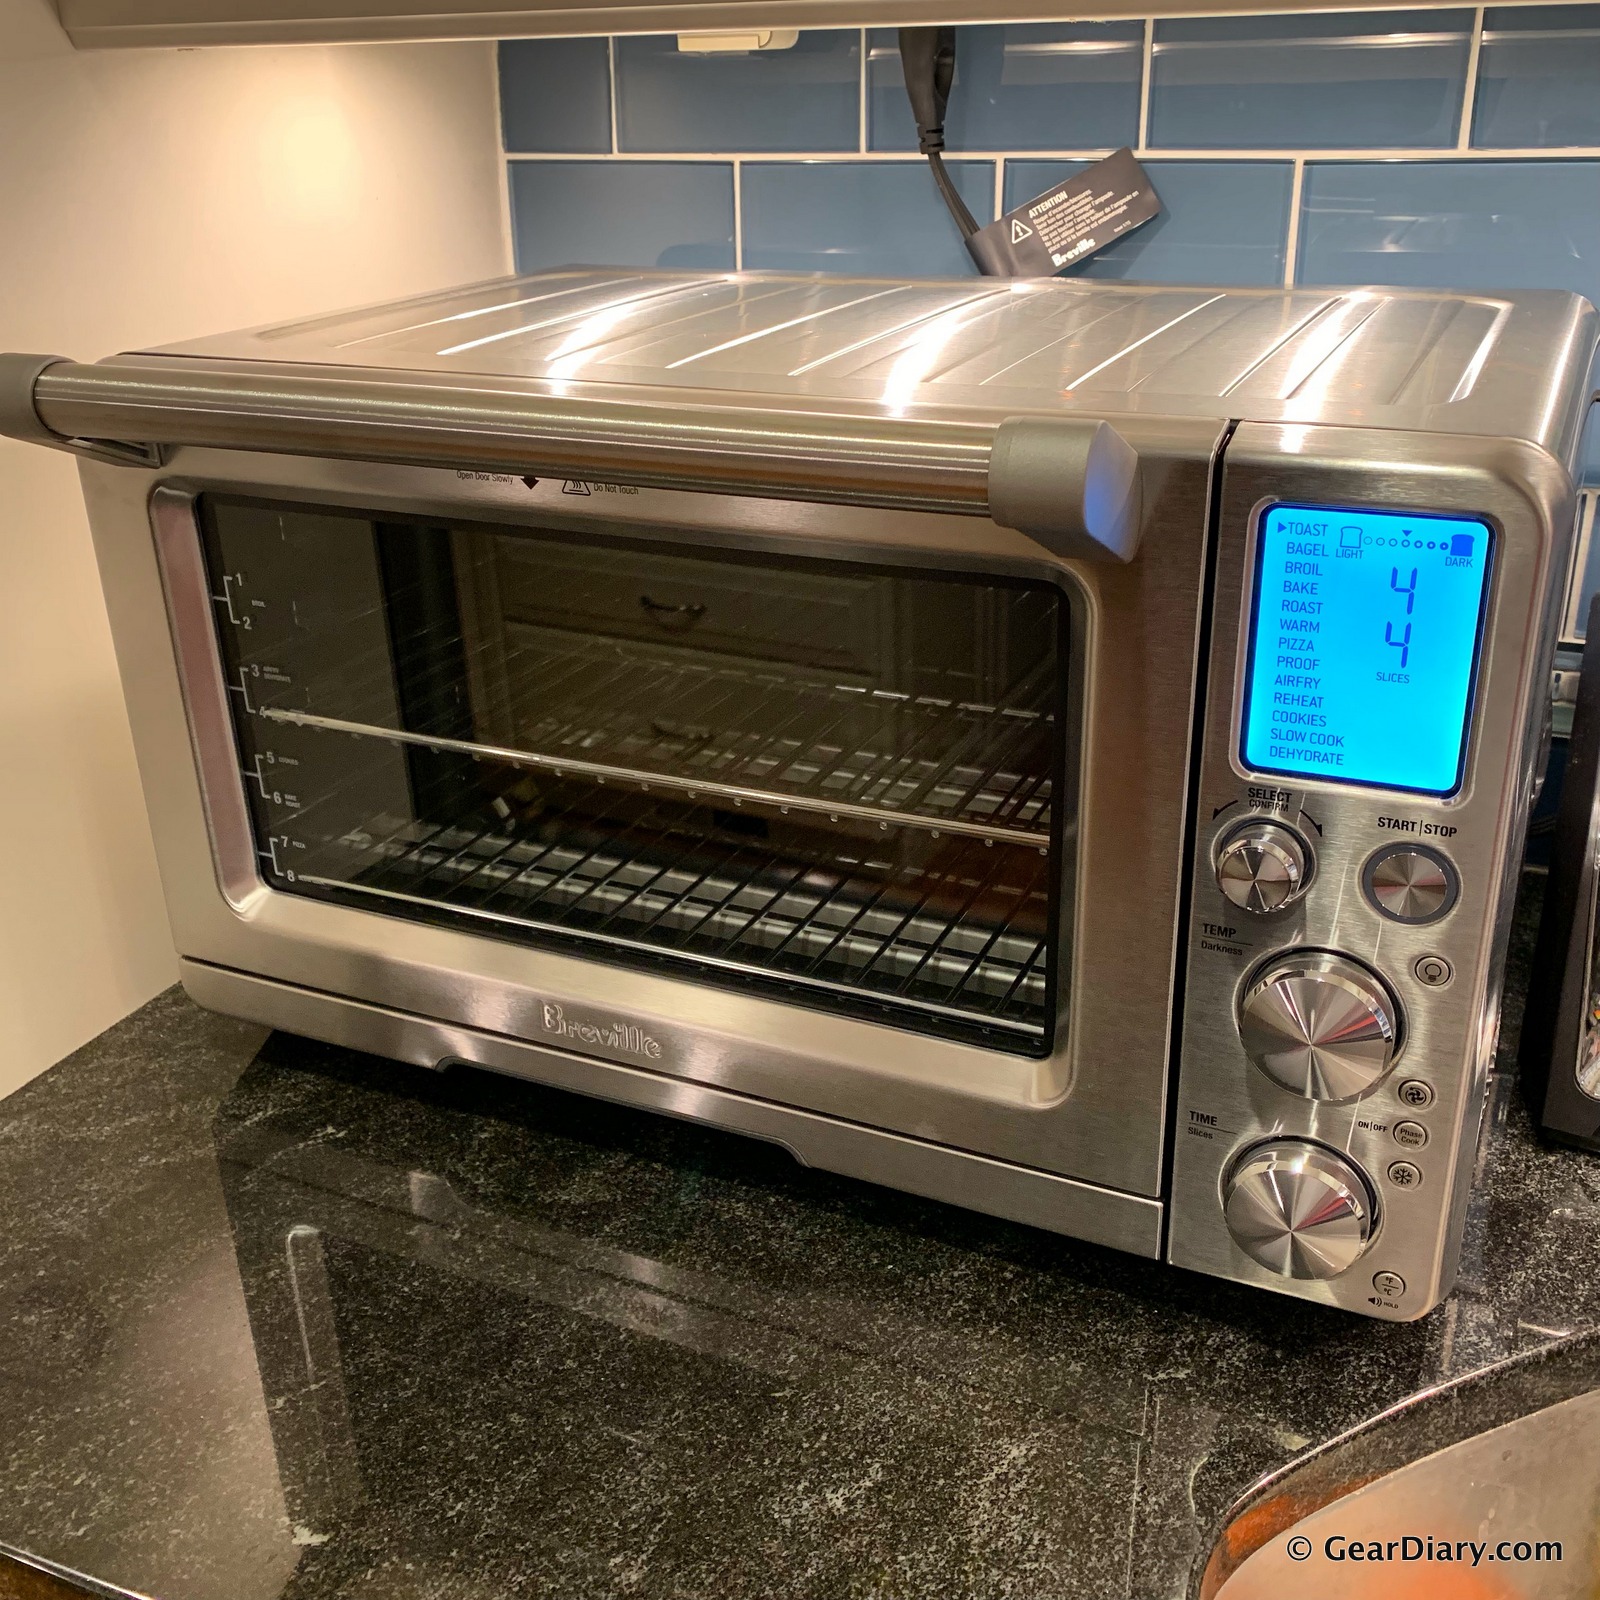 Breville - the Smart Oven